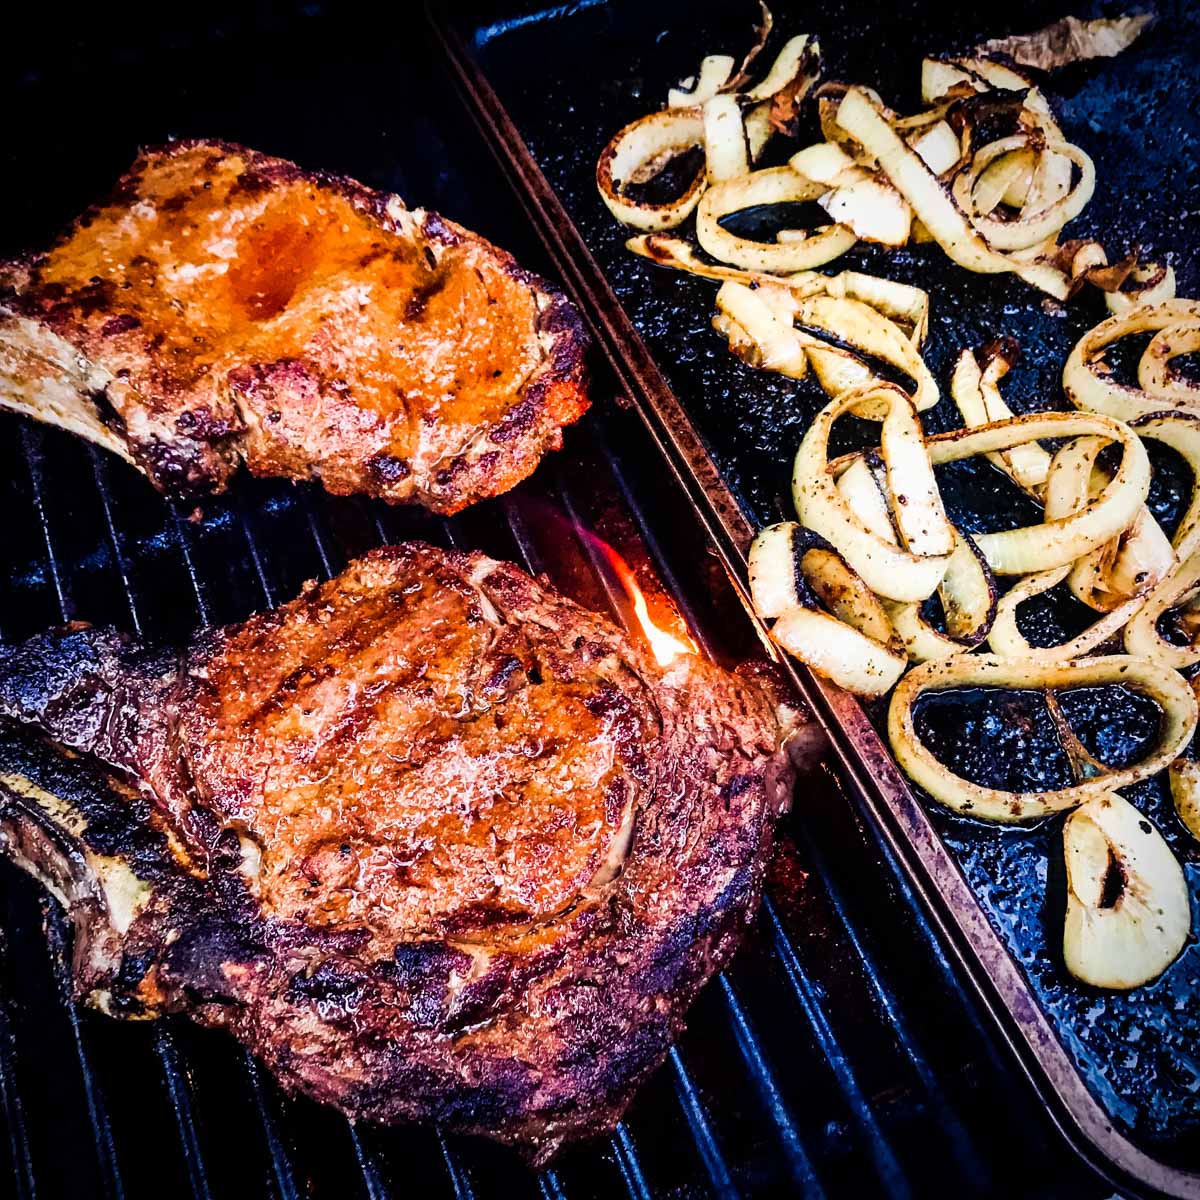 Outback steakhouse style rib-eye steaks on a grill with a griddle of onion rings